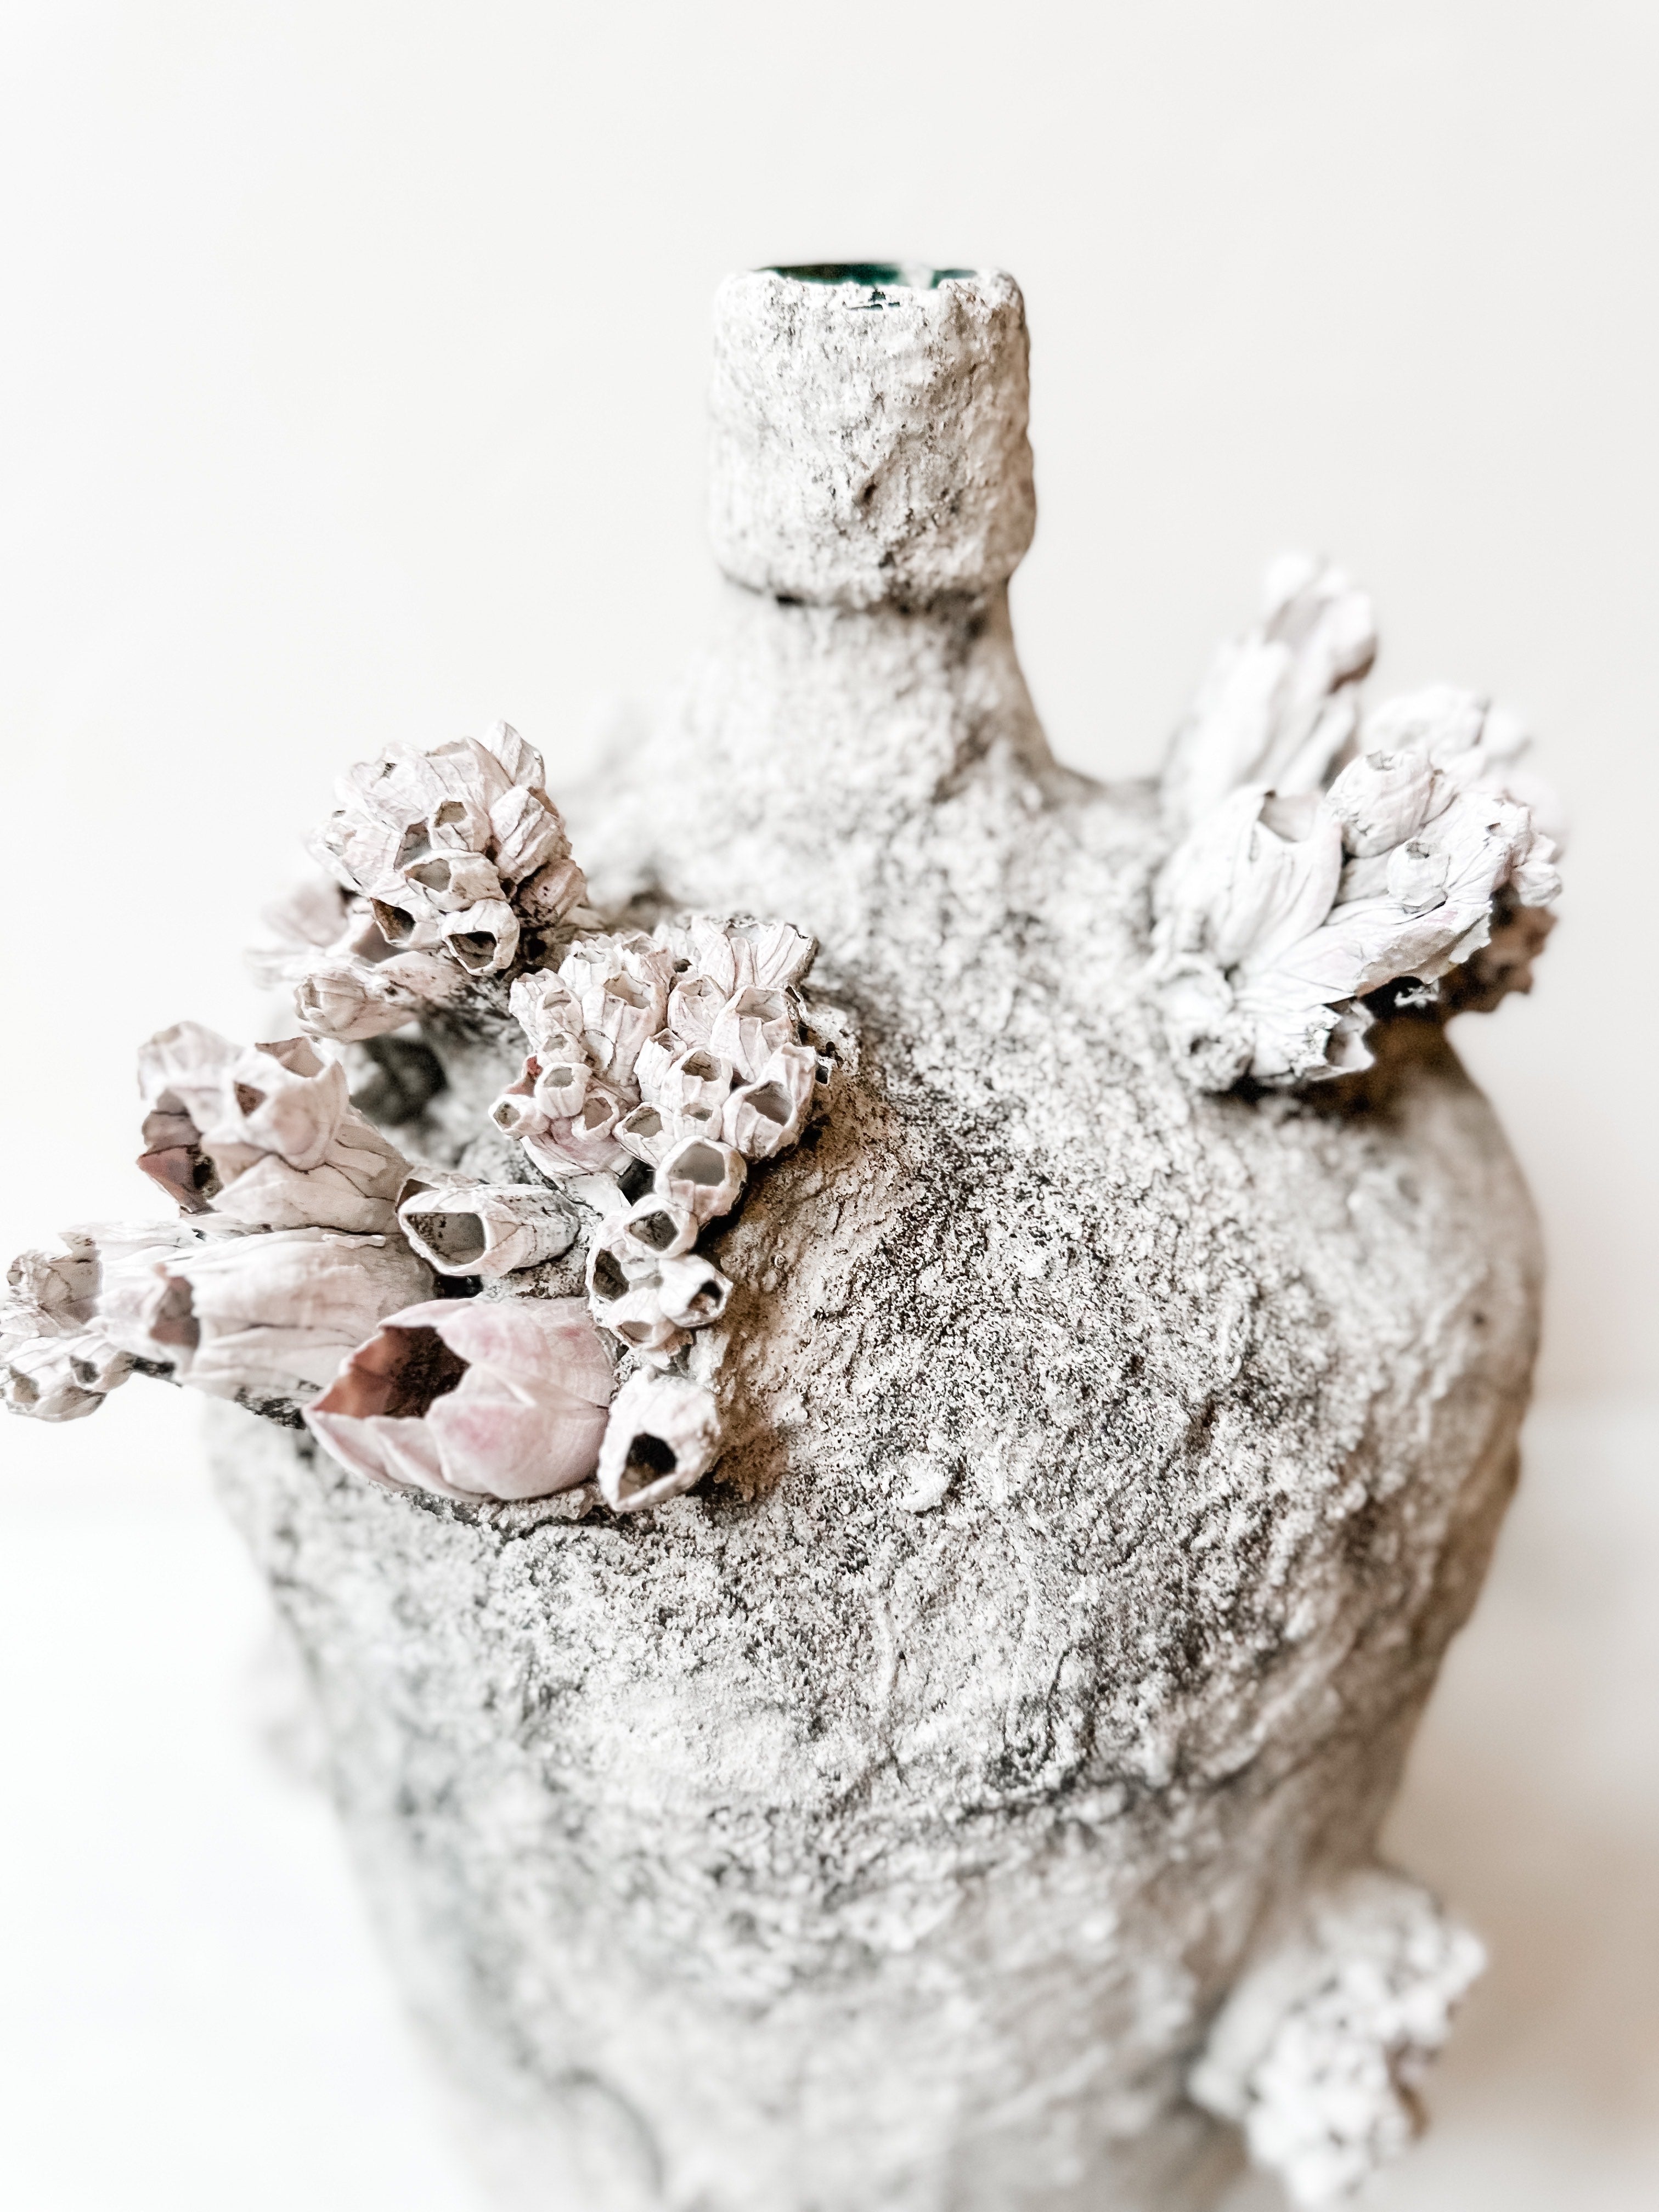 Coral and shell decor bottle